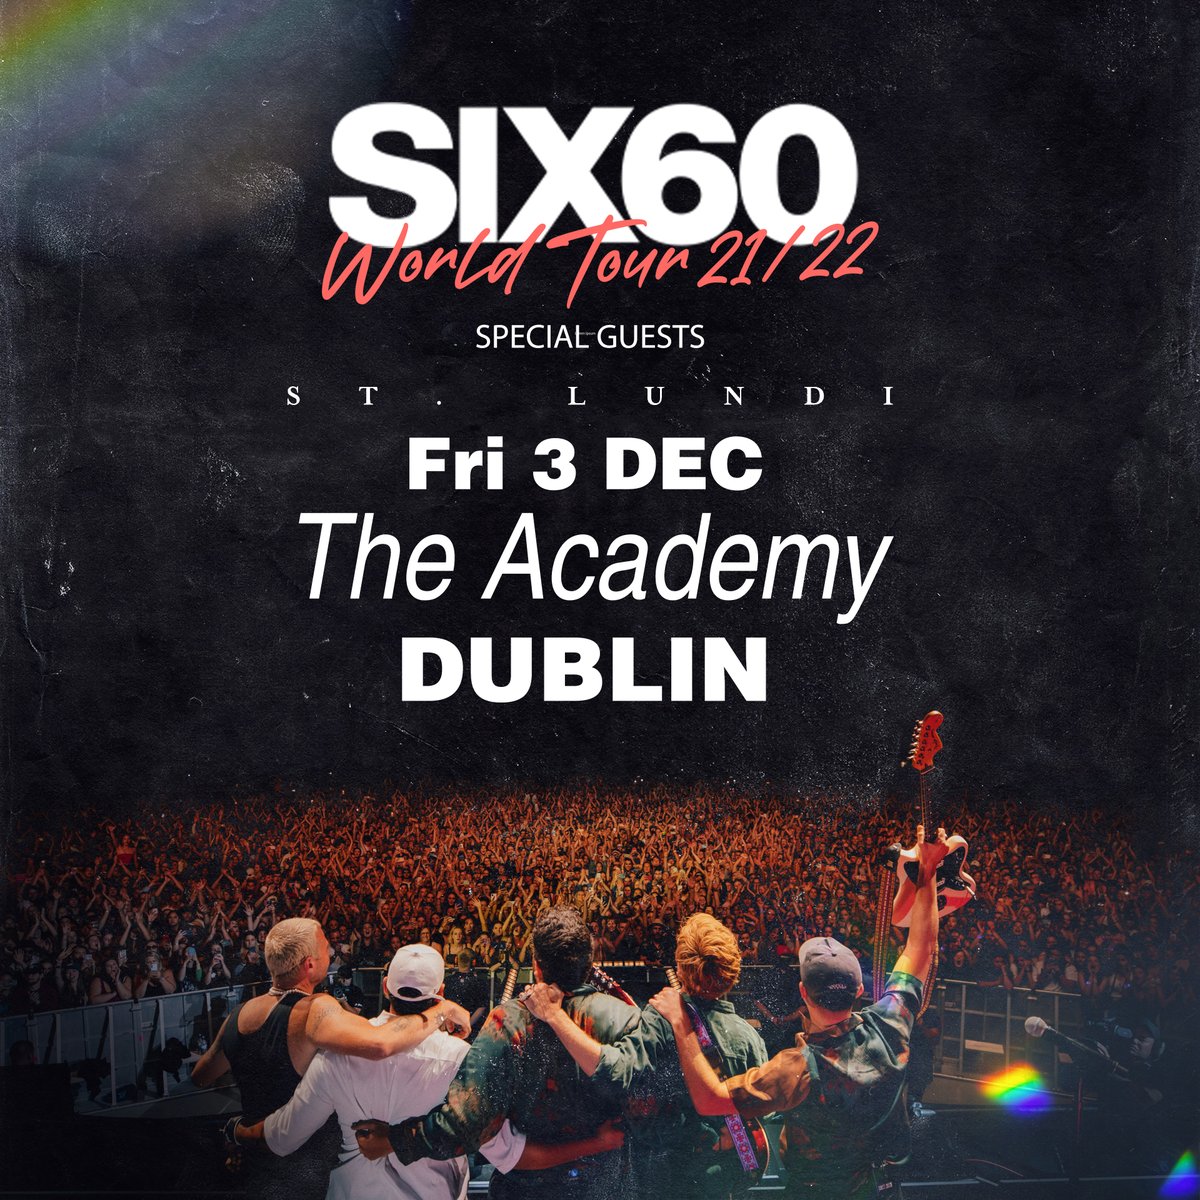 🎇 @SIX60 have just announced special guest @stlundi will be joining them at their 3 December show at @academydublin 🎫 Limited tickets on sale now bit.ly/3nsXBA5